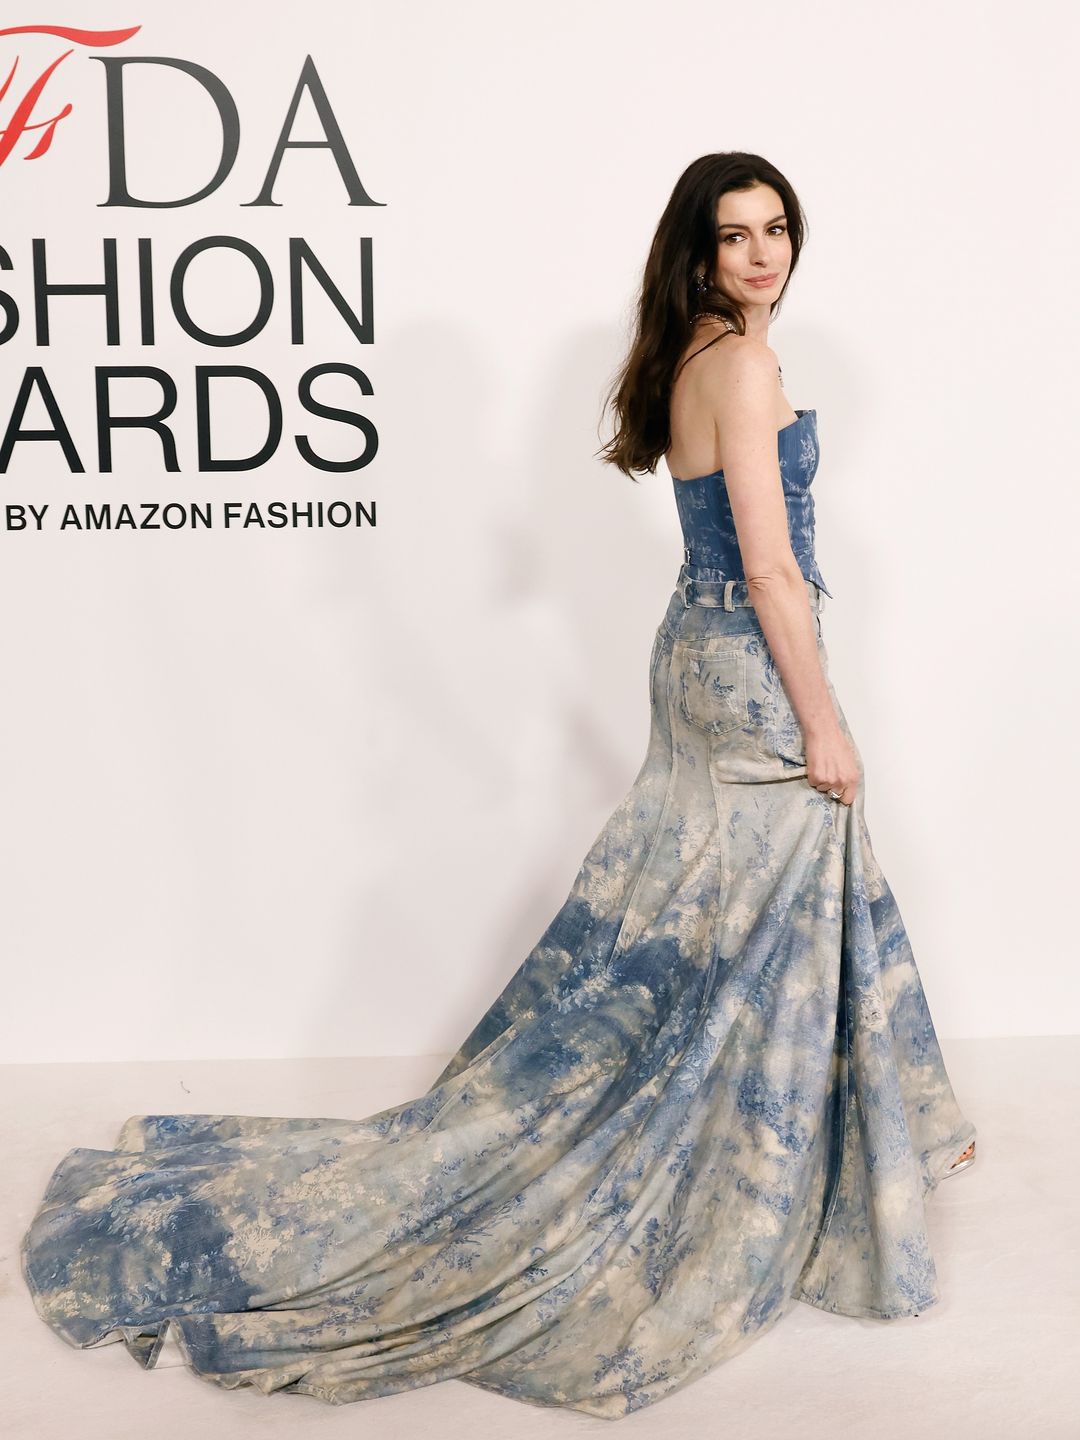 Anne Hathaway wearing double denim corset and maxi skirt 